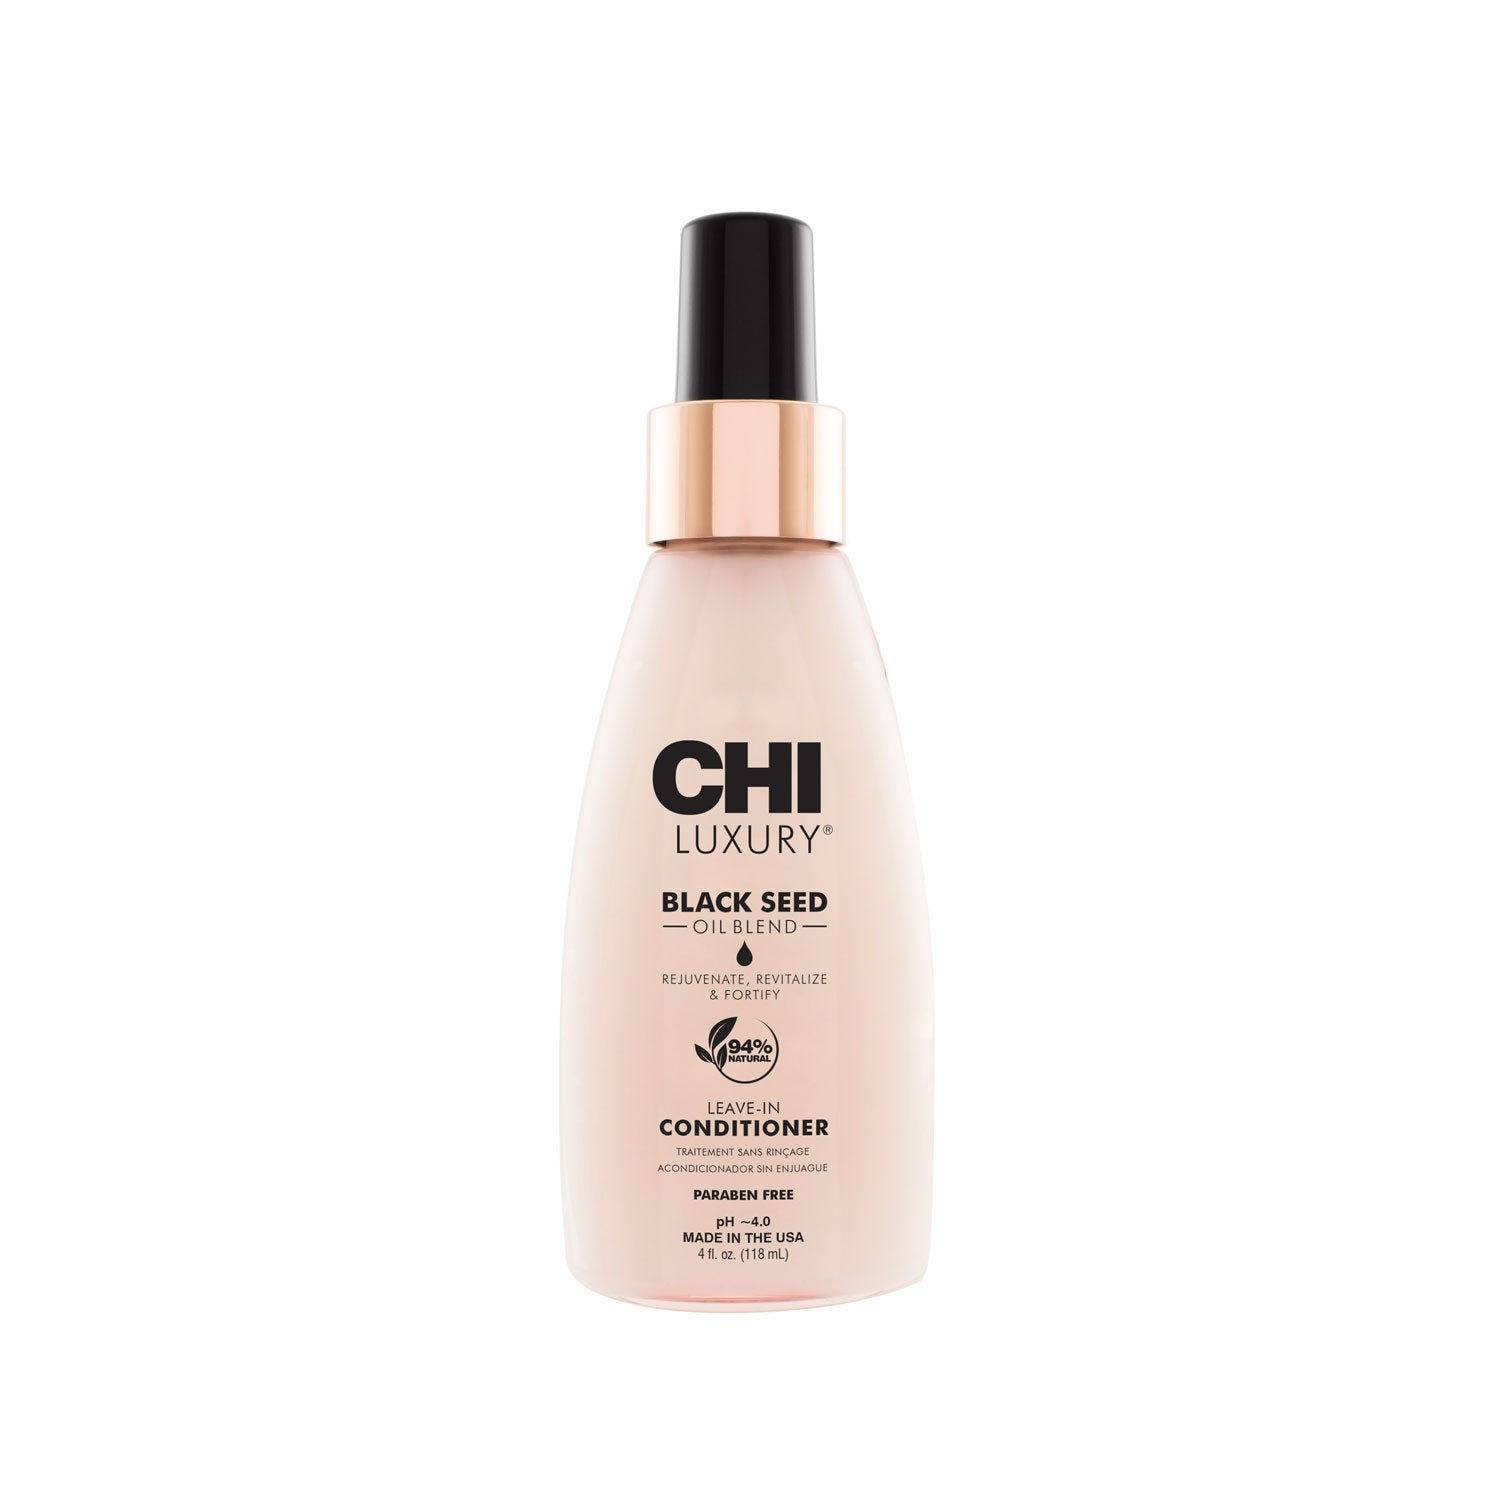 CHI Luxury Black Seed Oil Blend Leave-In Conditioner